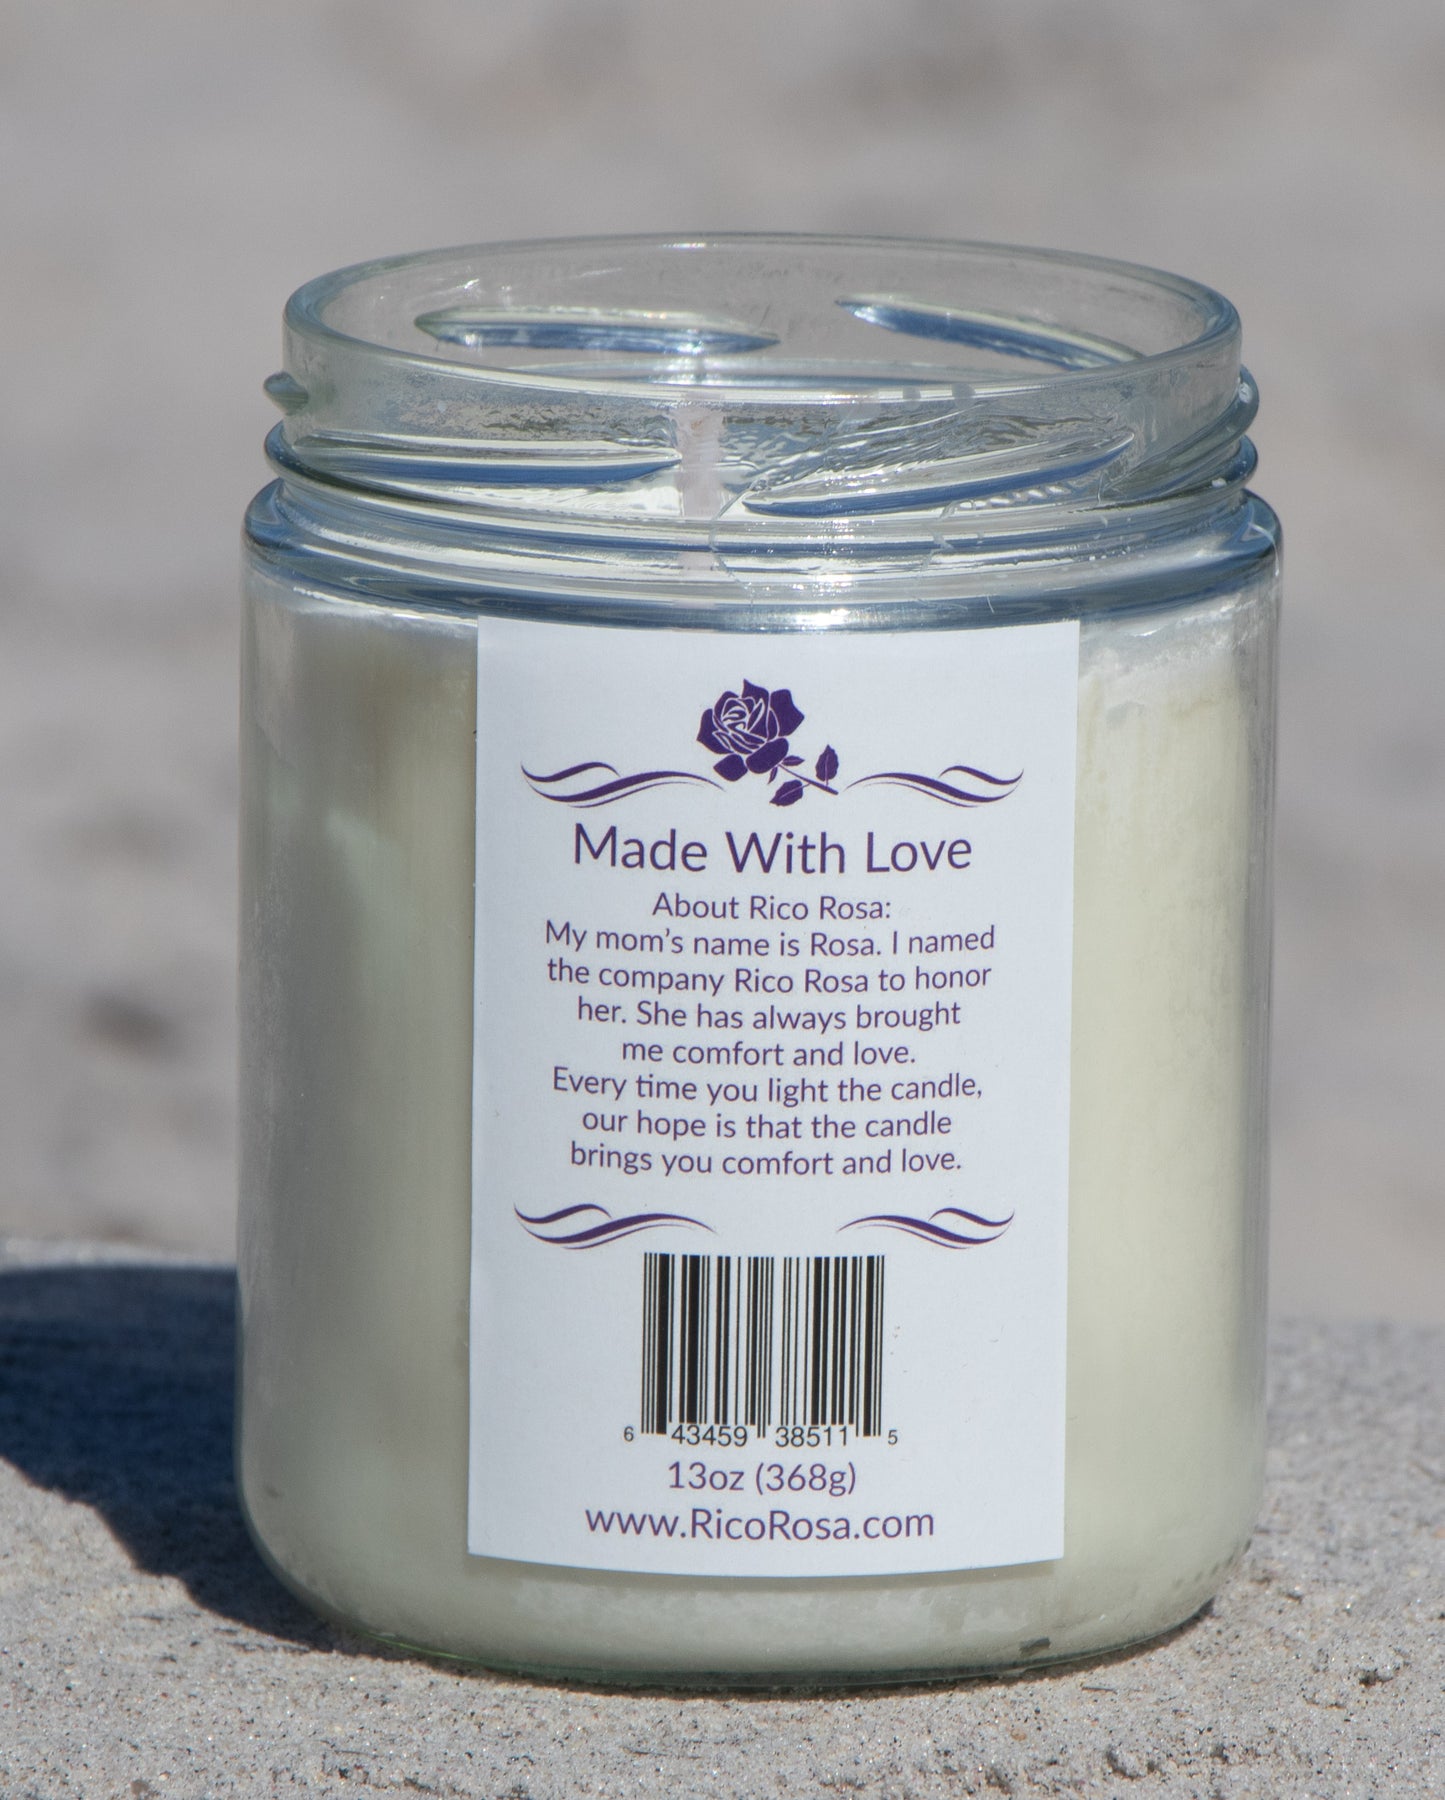 Relaxing Journey: Lavender Sage & Rosemary Scented Natural Soy Candle